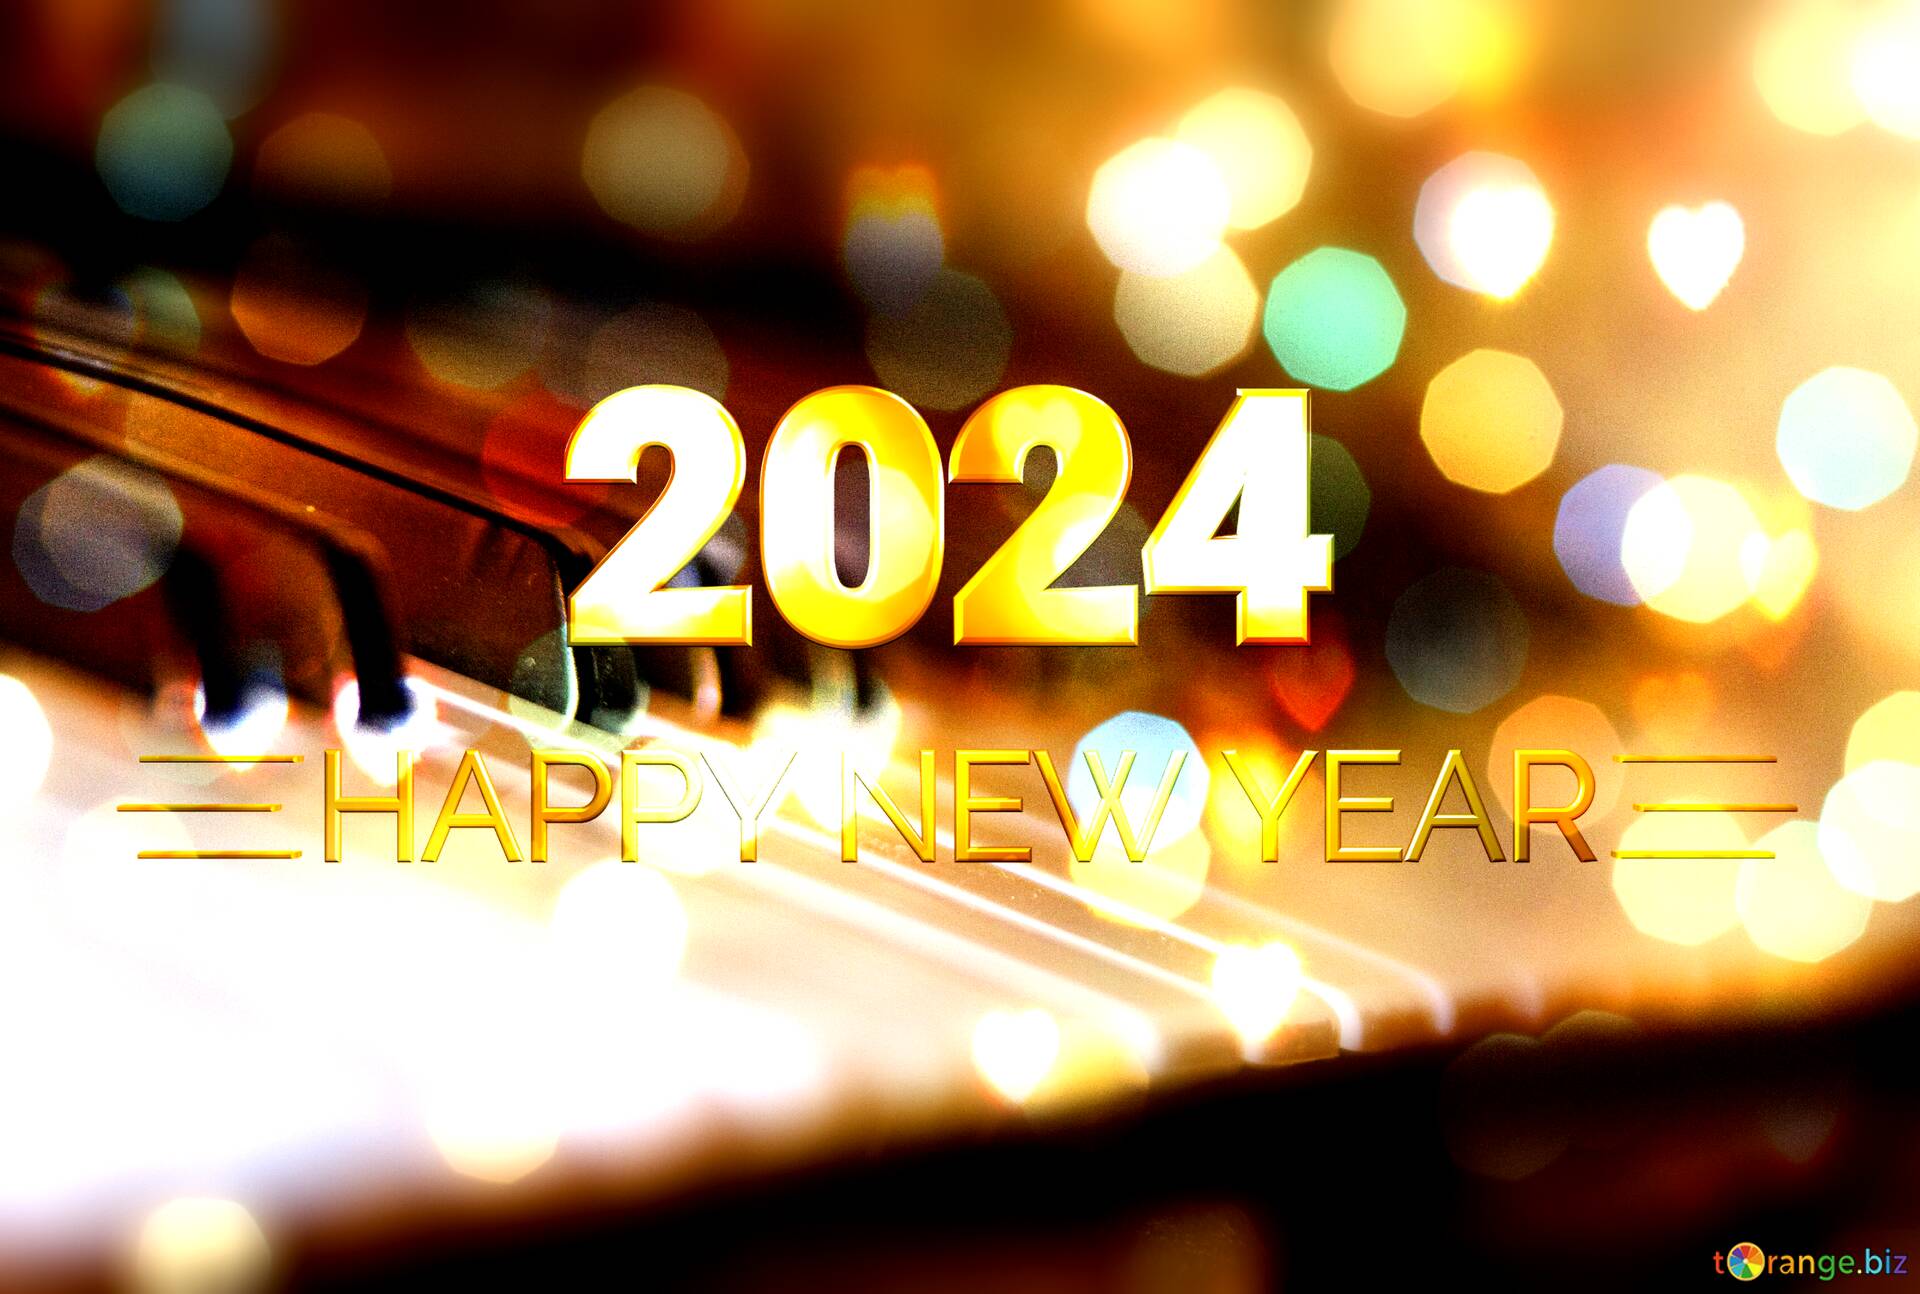 Piano Shiny happy new year 2024 background Best images. №227158